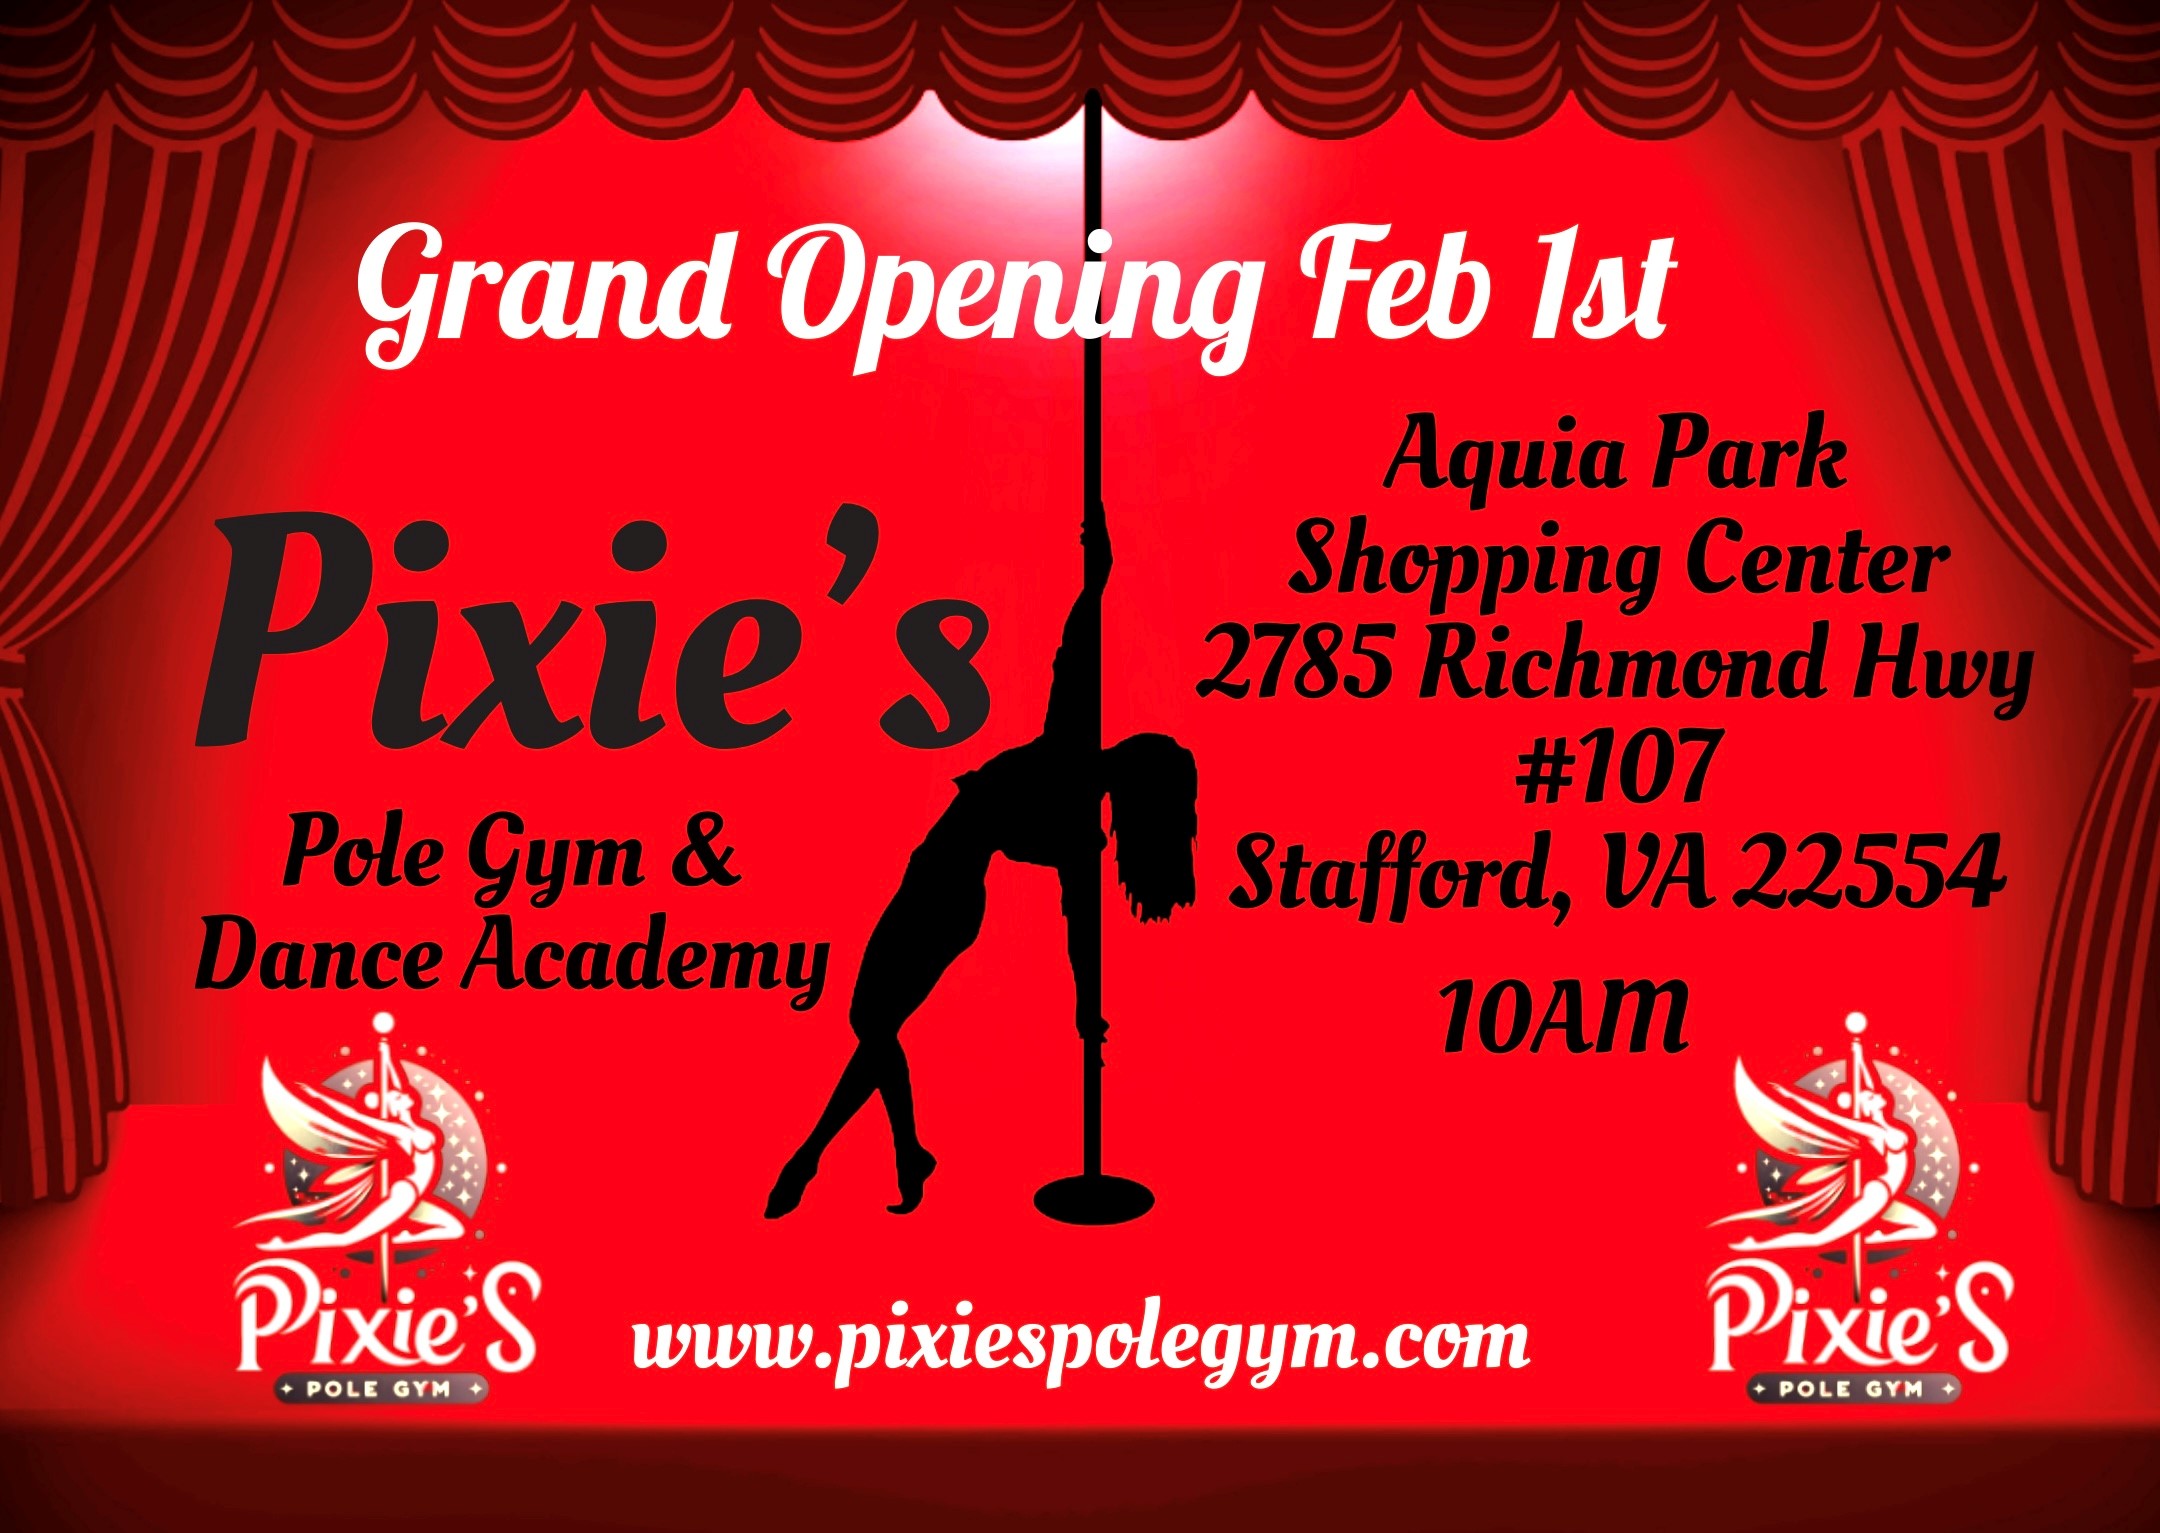 Pixie’s Pole Gym and Dance Academy Ribbon Cutting